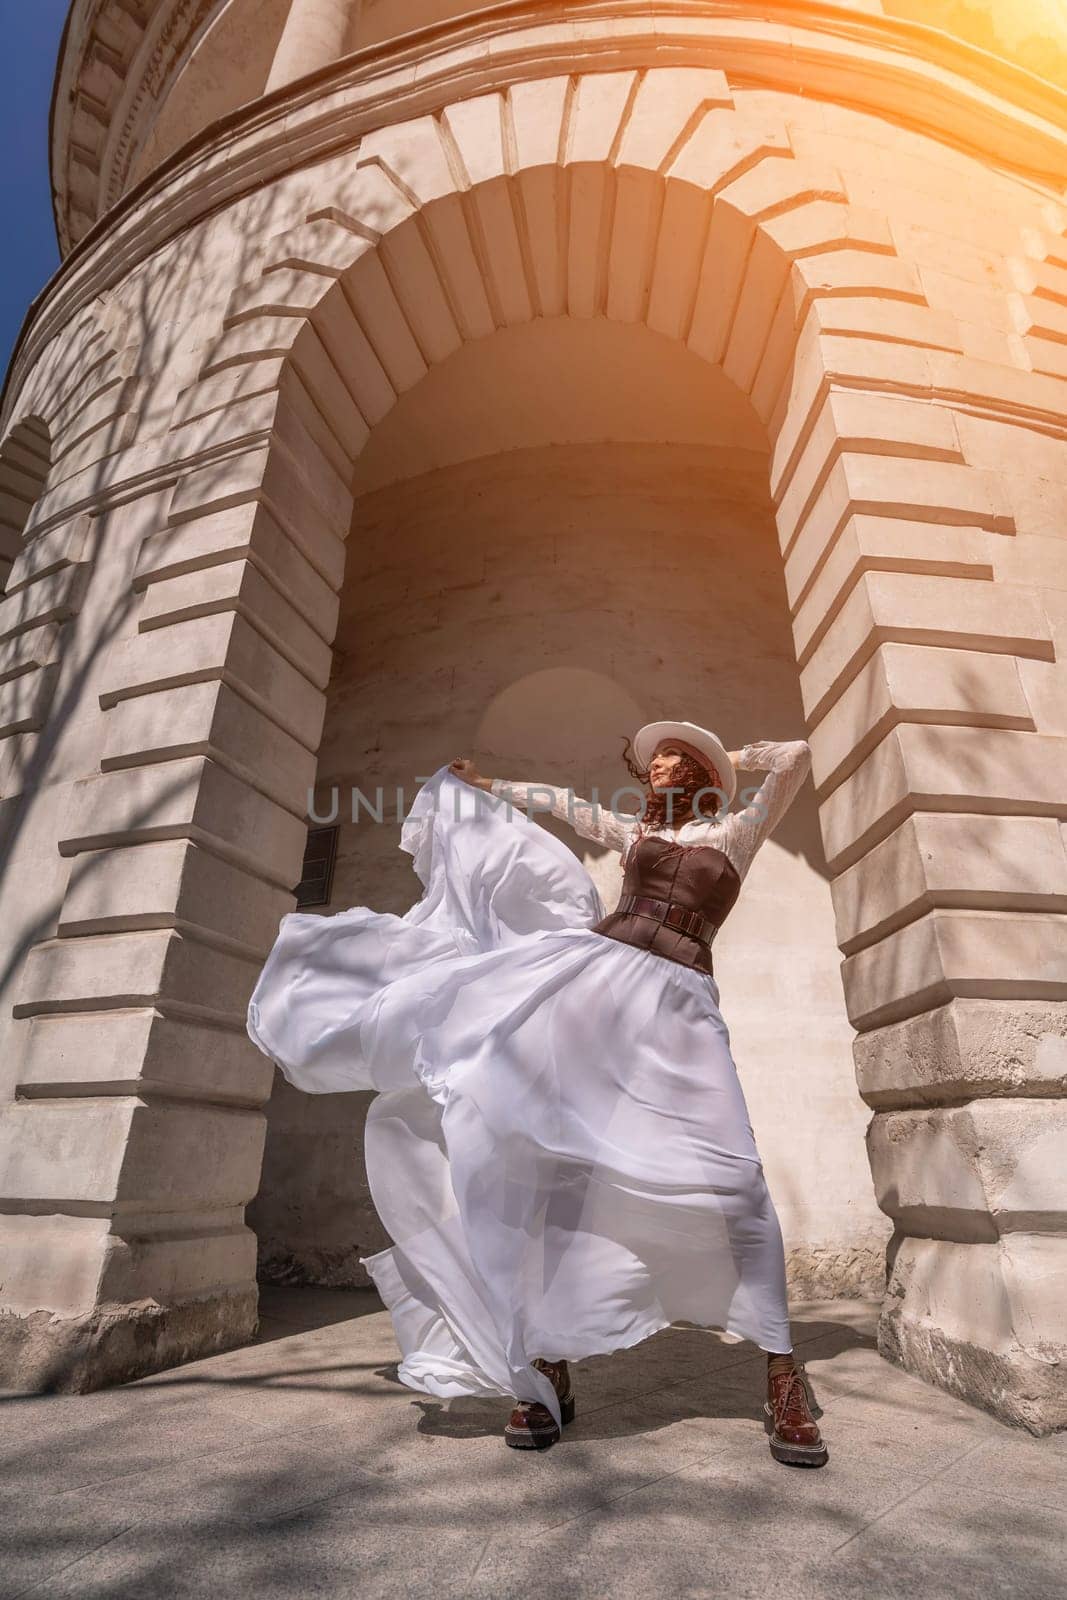 Stylish woman building city. A dancer in a long white skirt dances in front of a building with an arch. The skirt develops in the wind